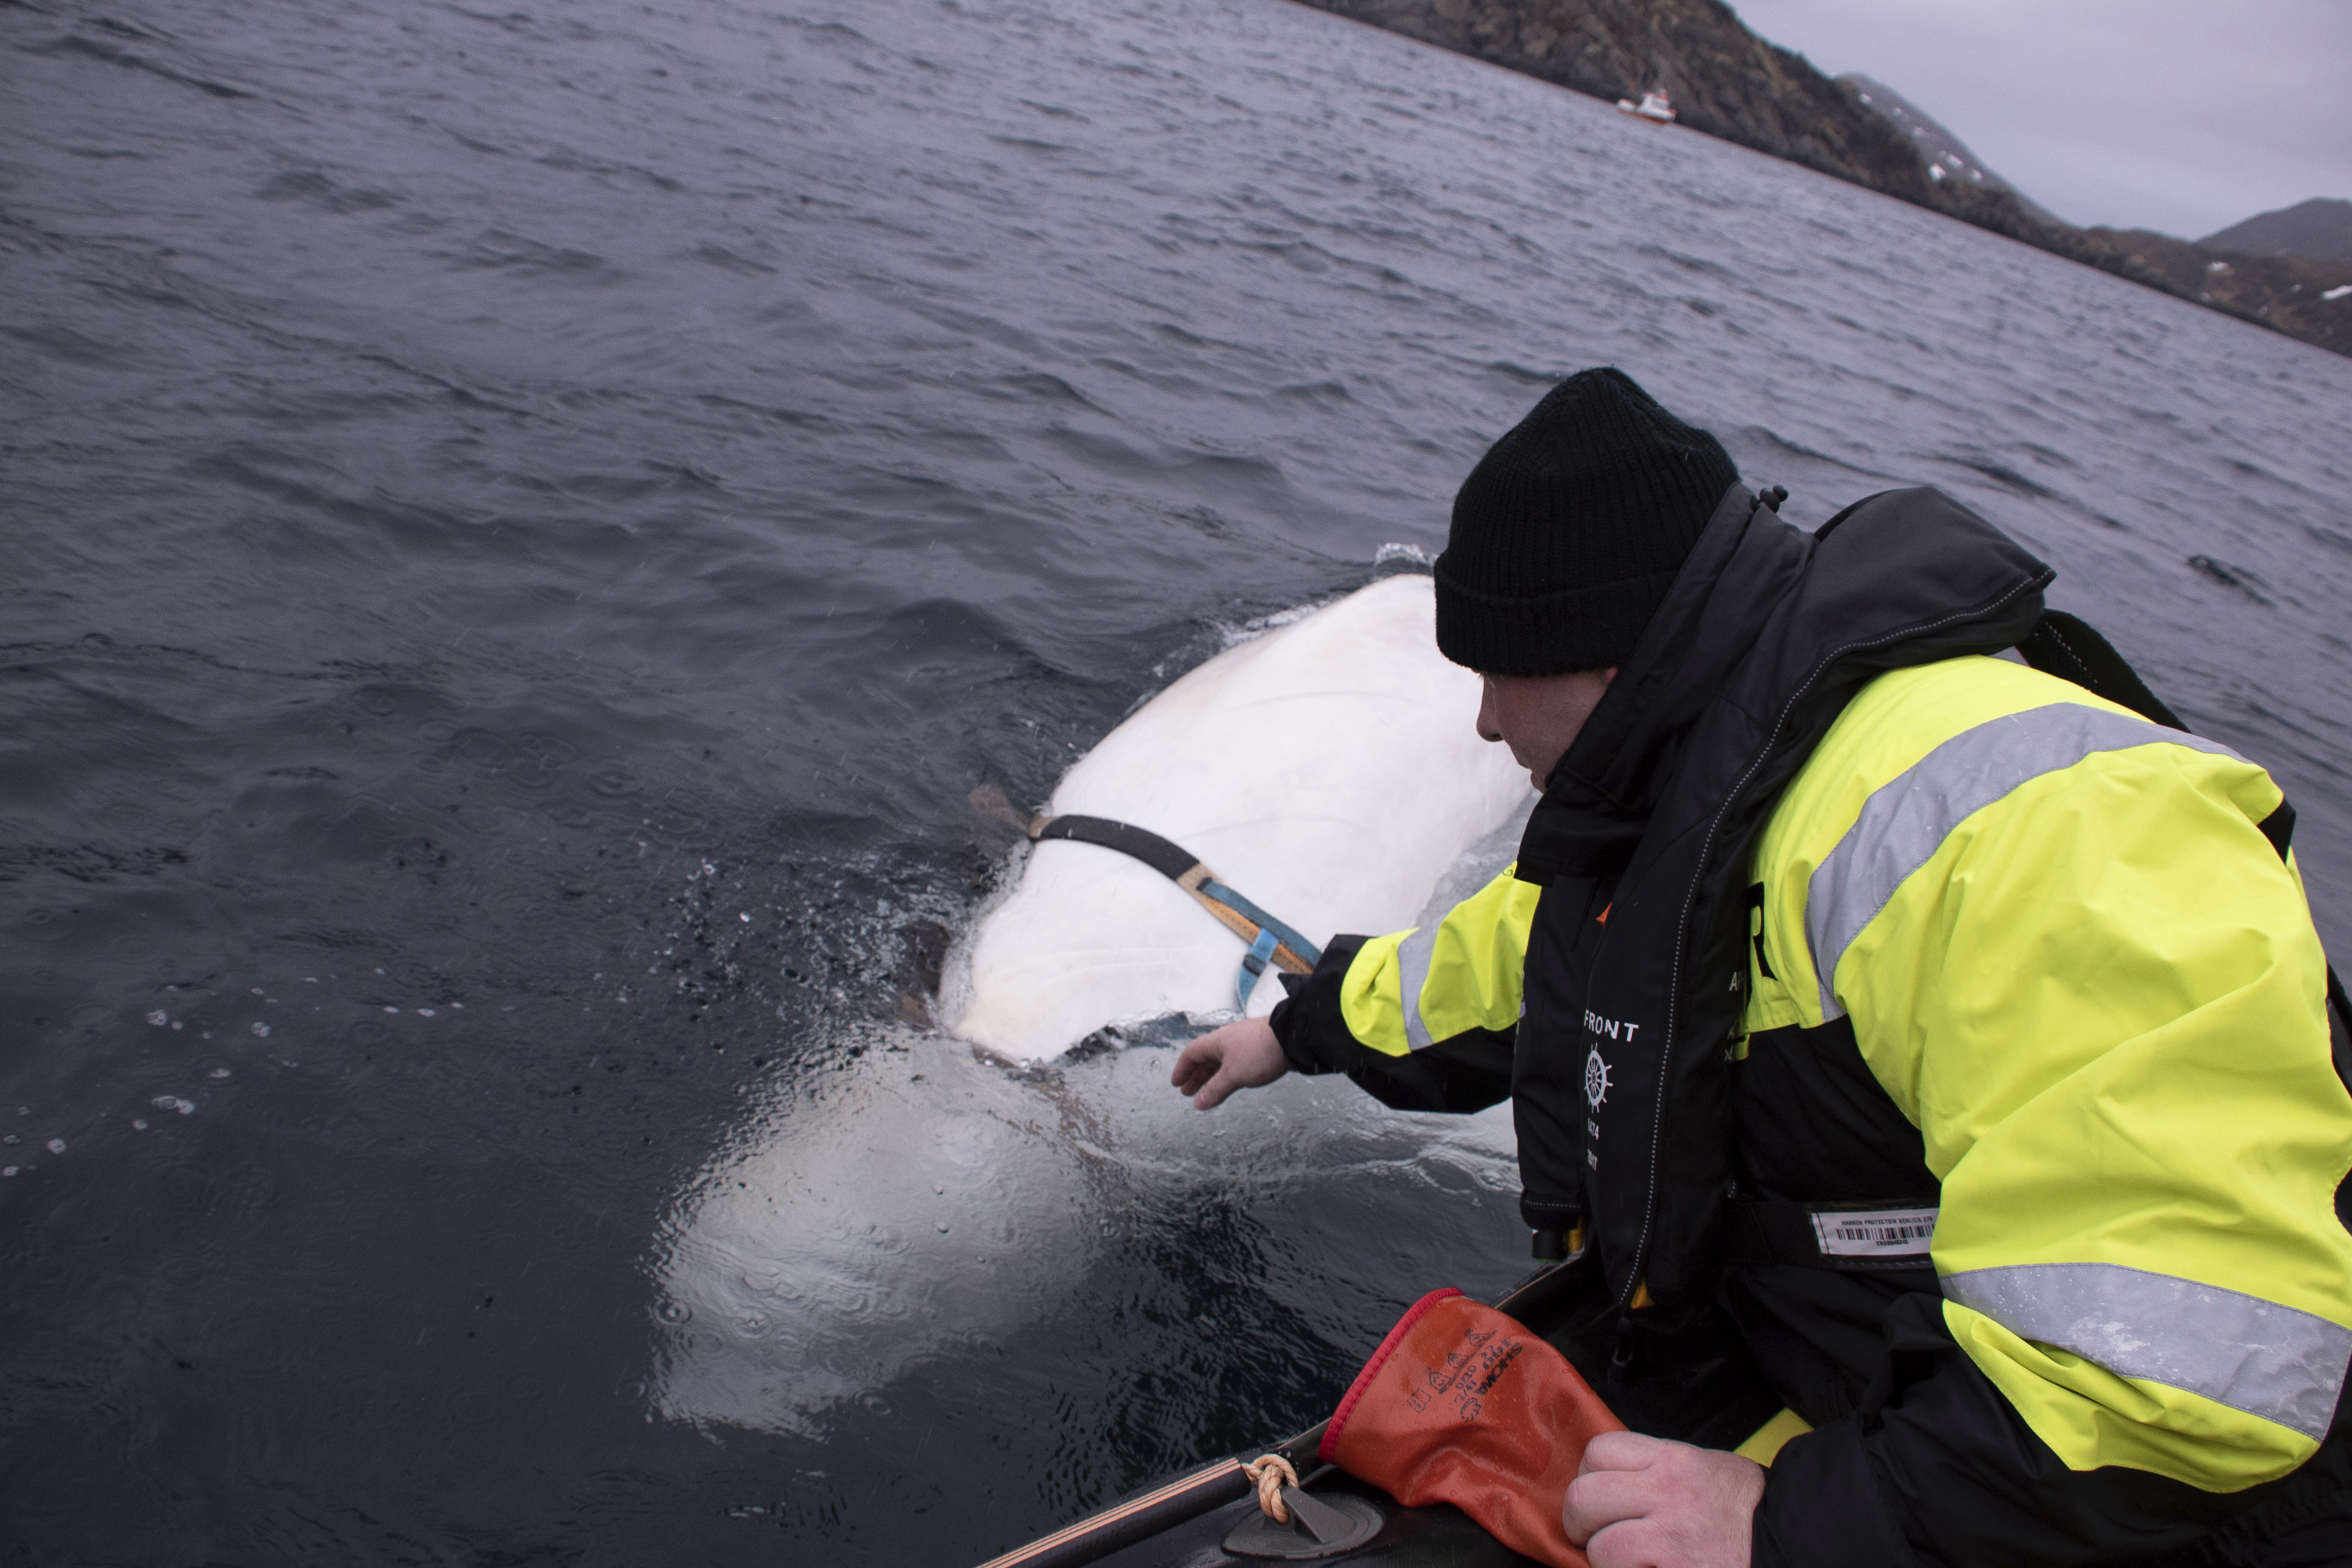 Joergen Ree Wiig tries to reach the harness attached to a beluga whale before the Norwegian fishermen were able to removed the tight harness, off the northern Norwegian coast Friday, April 26, 2019. The harness strap which features a mount for an action camera, says "Equipment St. Petersburg" which has prompted speculation that the animal may have escaped from a Russian military facility. (Joergen Ree Wiig/Norwegian Direcorate of Fisheries Sea Surveillance Unit via AP)